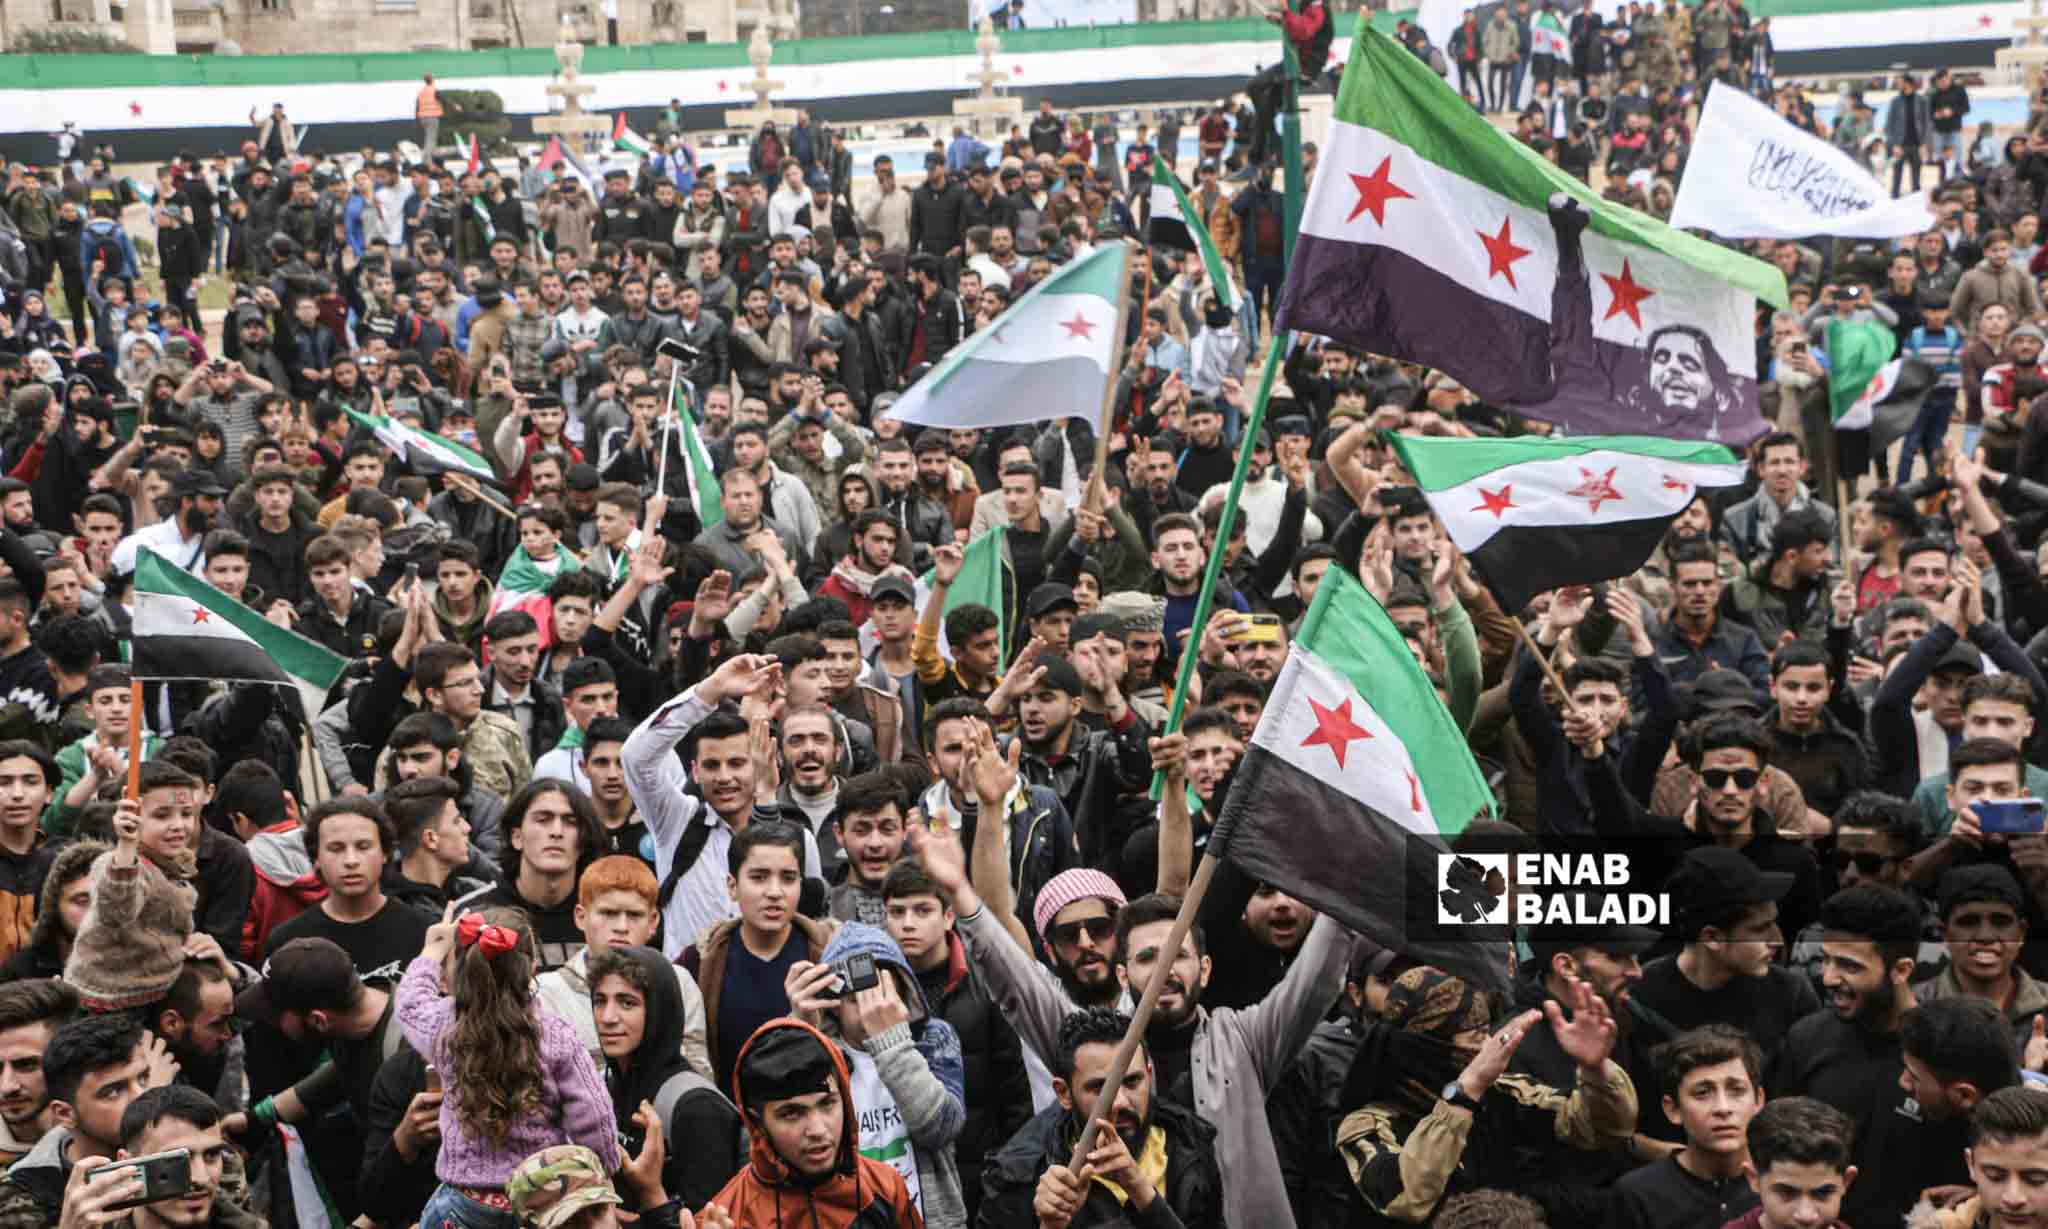 A demonstration in Idlib city to commemorate the 12th anniversary of the Syrian revolution - March 15, 2023 (Enab Baladi/Anas al-Khouli)